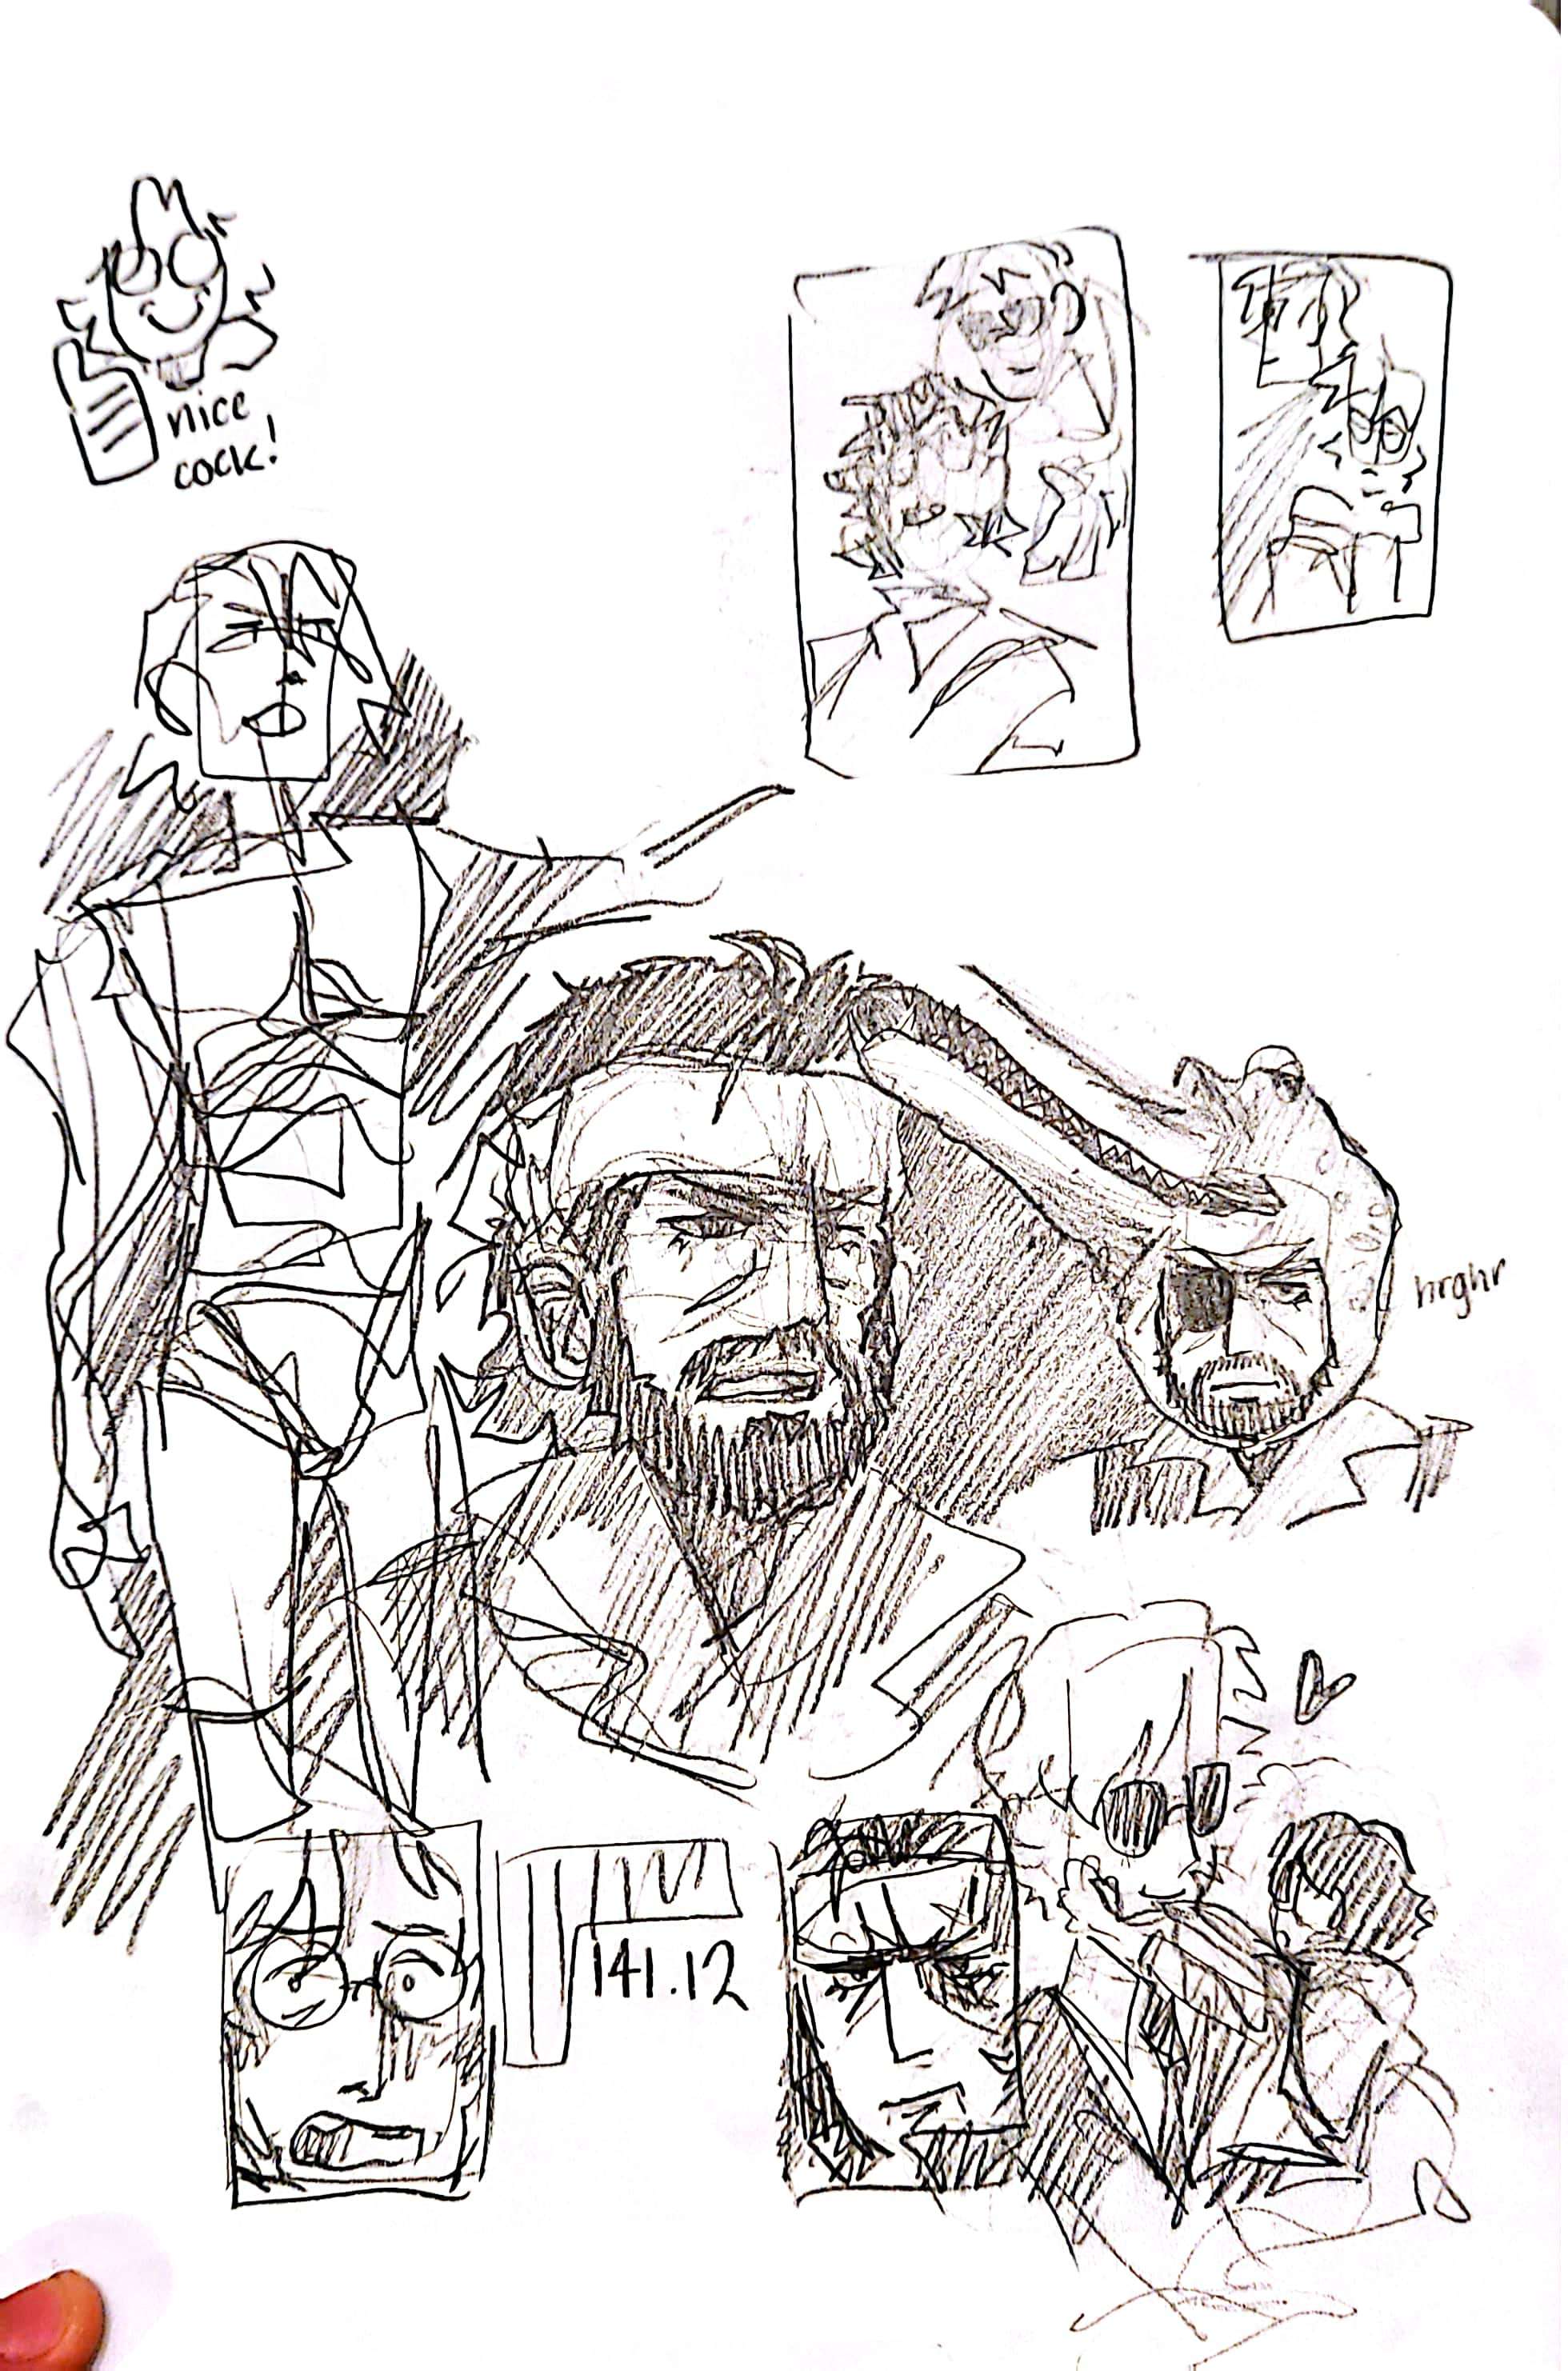 A page full of doodles, from the top to bottom, left to right: a very messy doodle of Otacon doing a thumbs up that says 'nice cock!'; two thumbnails of Otacon & Strangelove compositions; A rough sketch of MGS2 Raiden; Two sketches of Naked Snake, one of him yelling looking upset and the other of him looking annoyed in the Croc Cap; a messy doodle of Snake and Otacon on a codec call, Otacon with the close-up portrait; A doodle of Strangelove holding a baby Hal